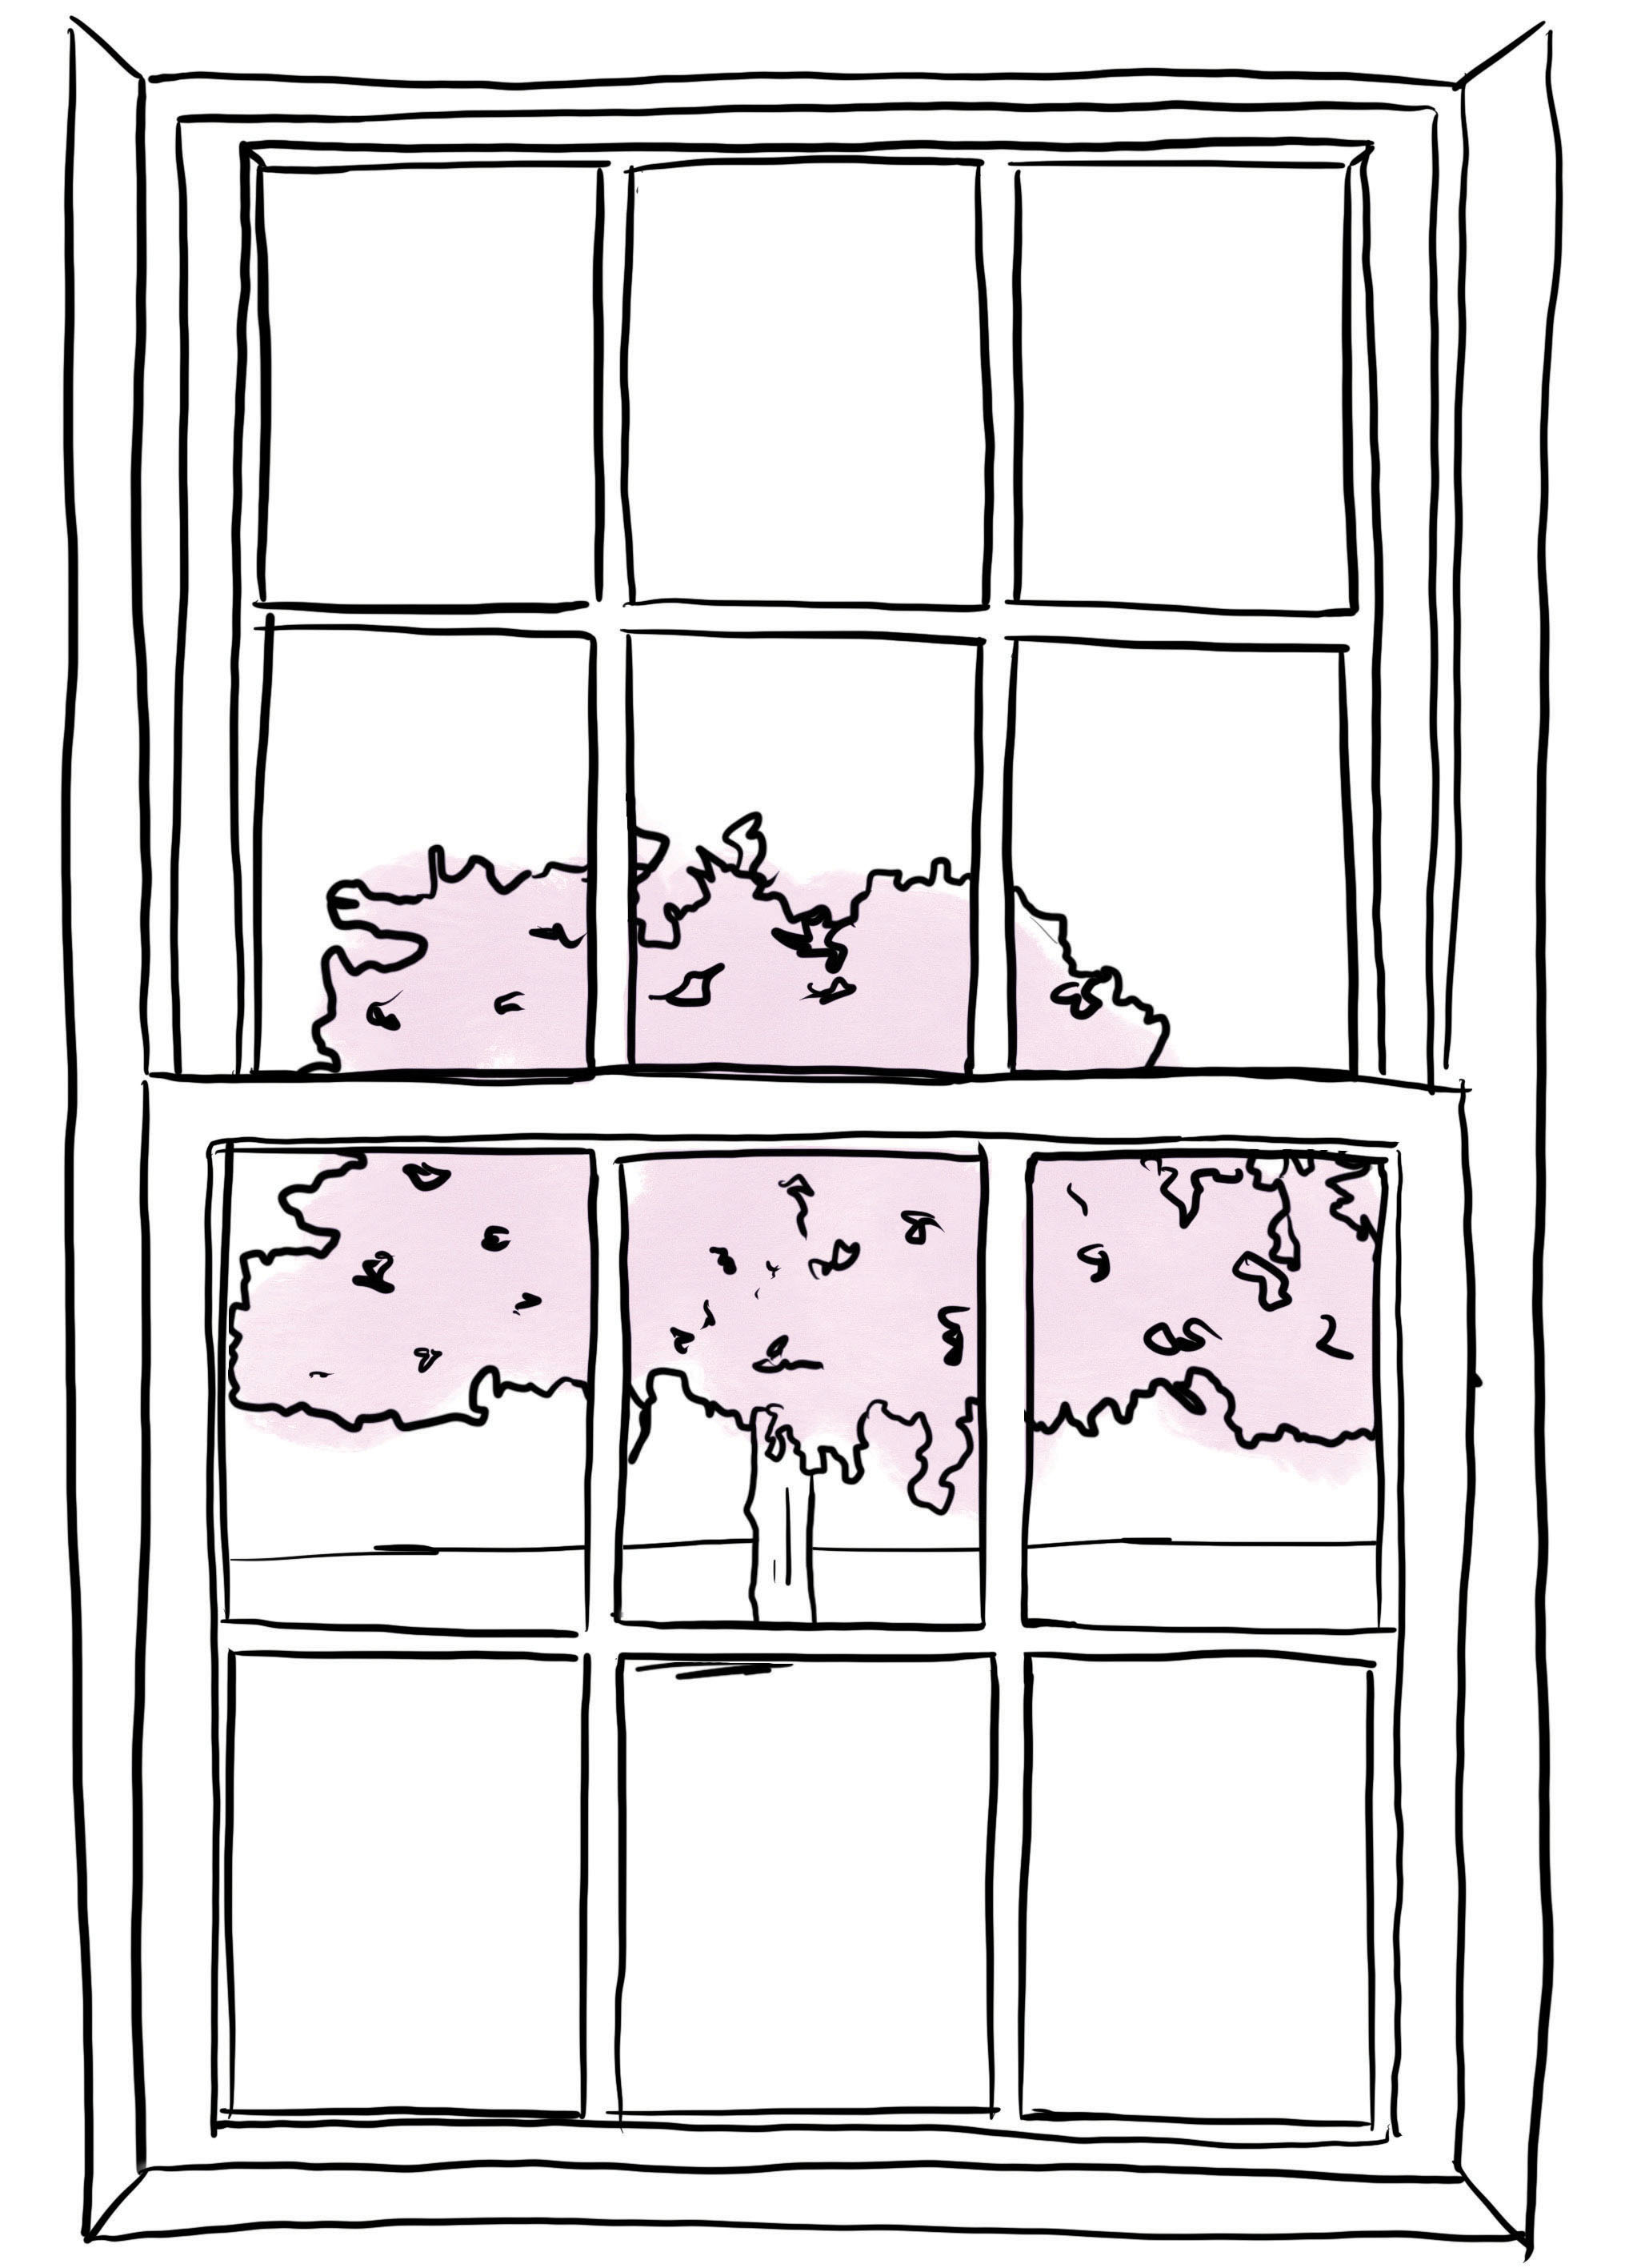 Illustration of a window with a view of a tree